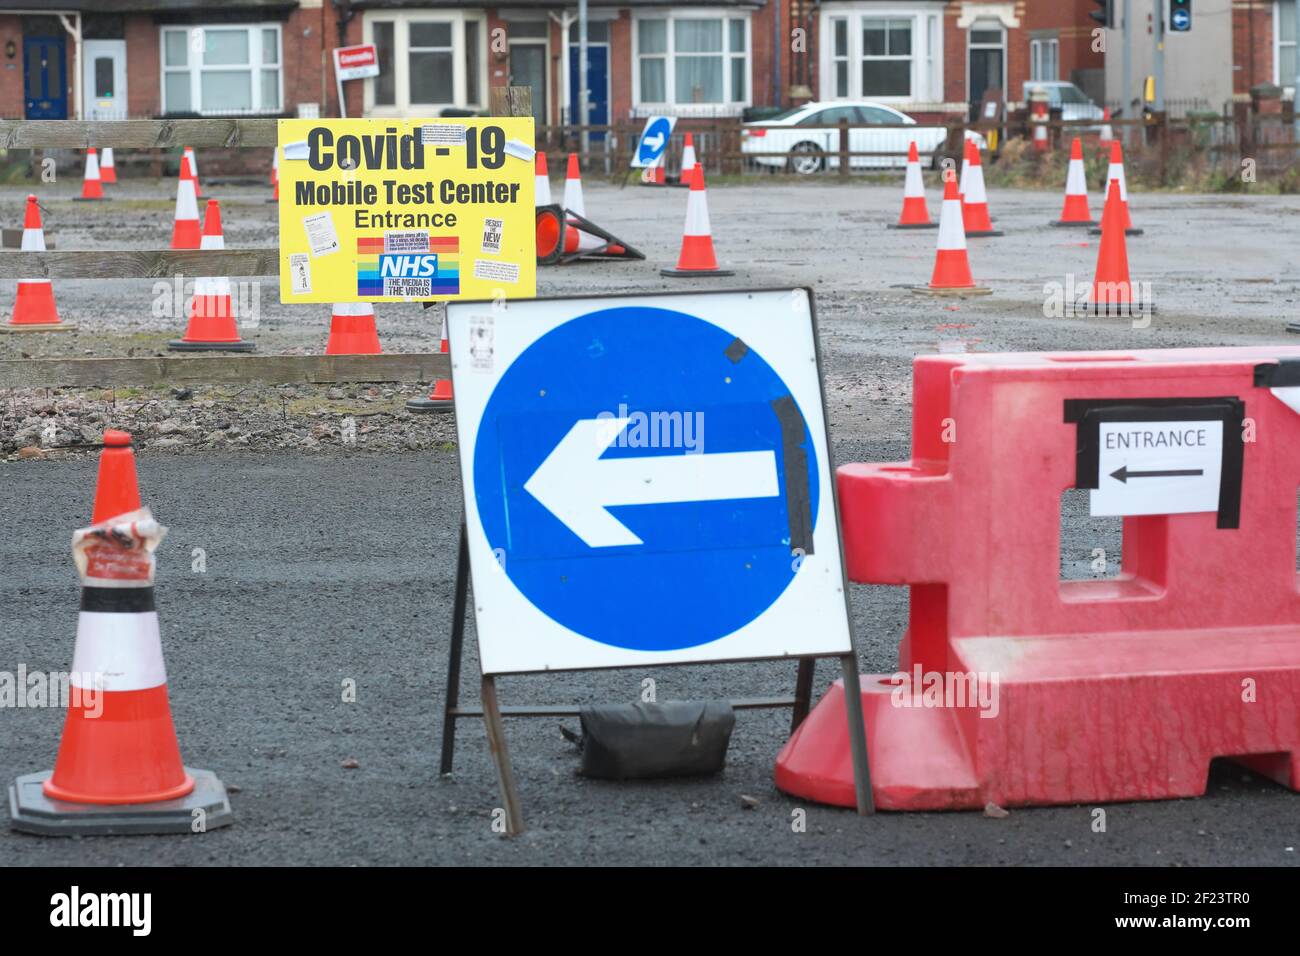 Hereford, Herefordshire, UK - Wednesday 10th March 2021 - The Covid-19 Test and Trace swab testing centre in Hereford is currently closed and out of use. The entrance sign is now covered in anti Covid anti pandemic stickers. Photos Steven May / Alamy Live News Stock Photo